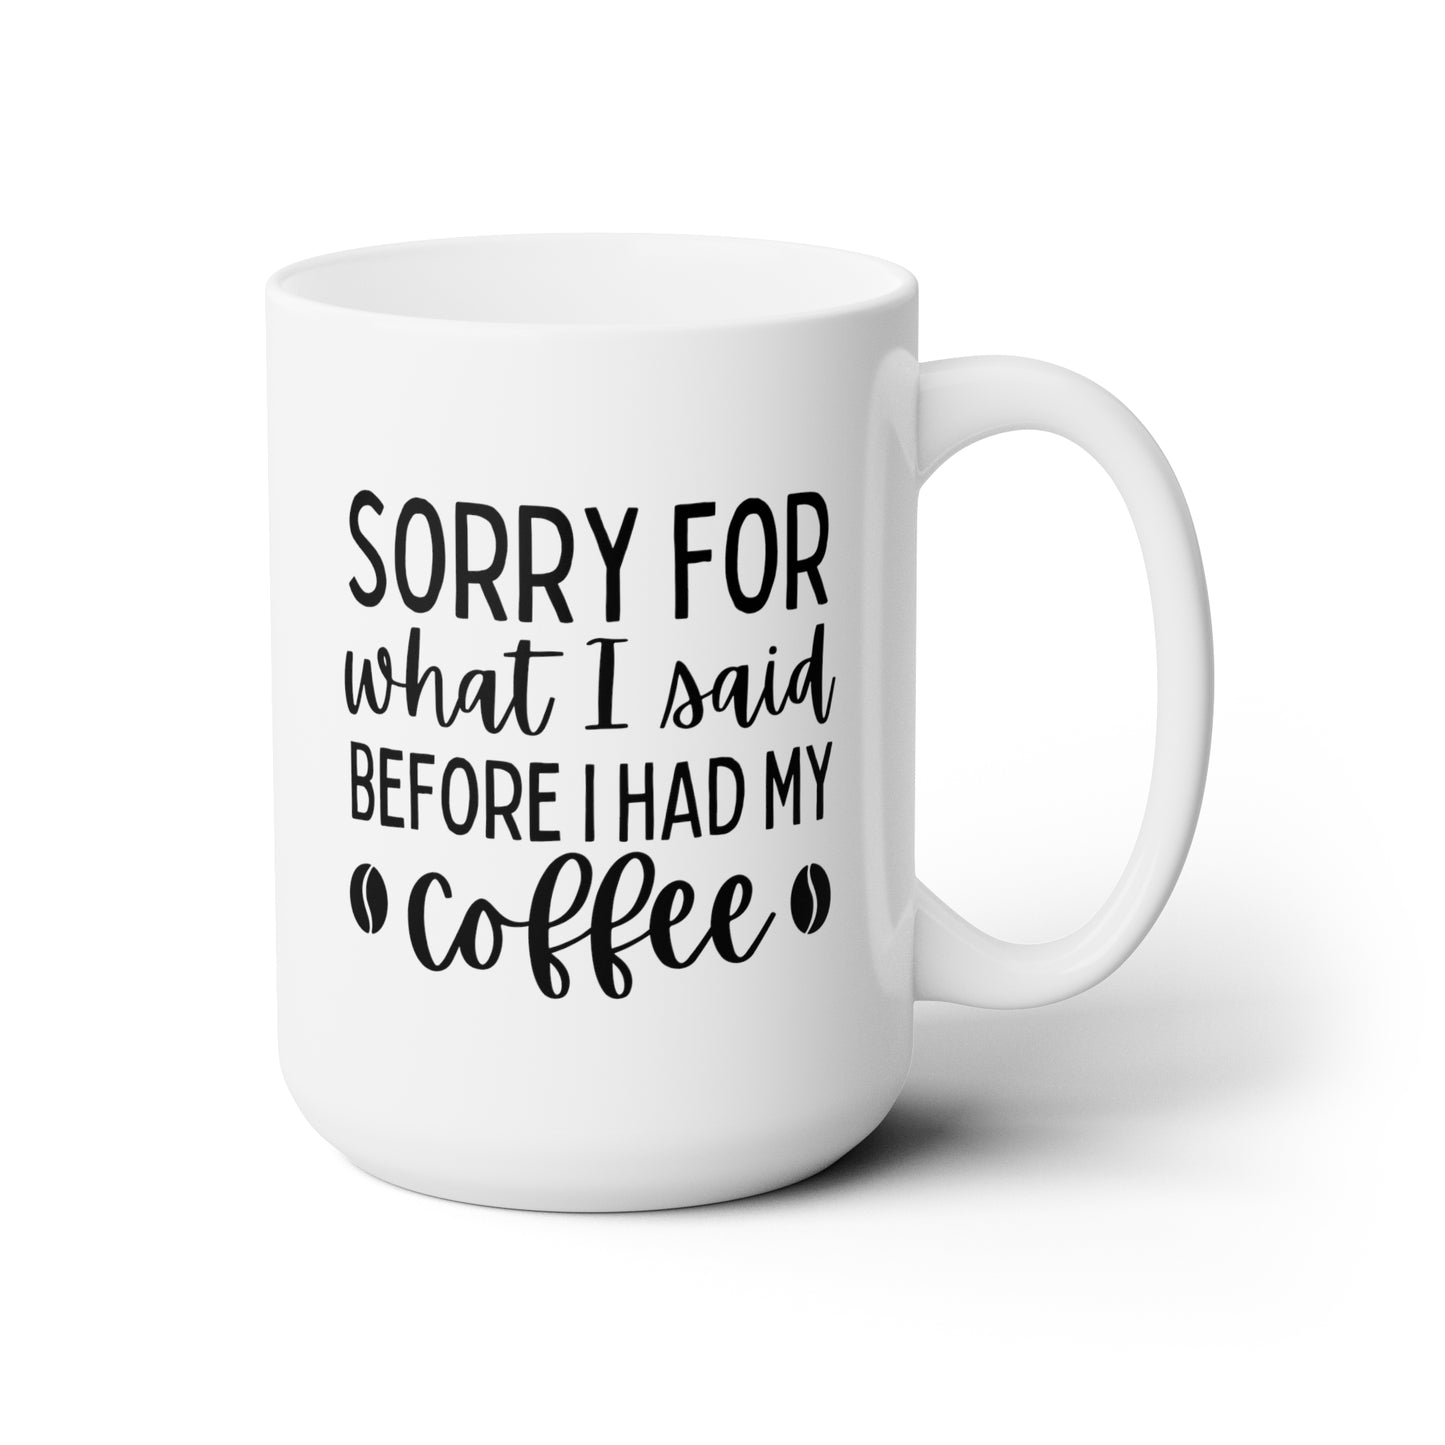 Sorry For What I Said Before I Had My Coffee 15oz white funny large coffee mug gift for friends family coffee lover fun present waveywares wavey wares wavywares wavy wares